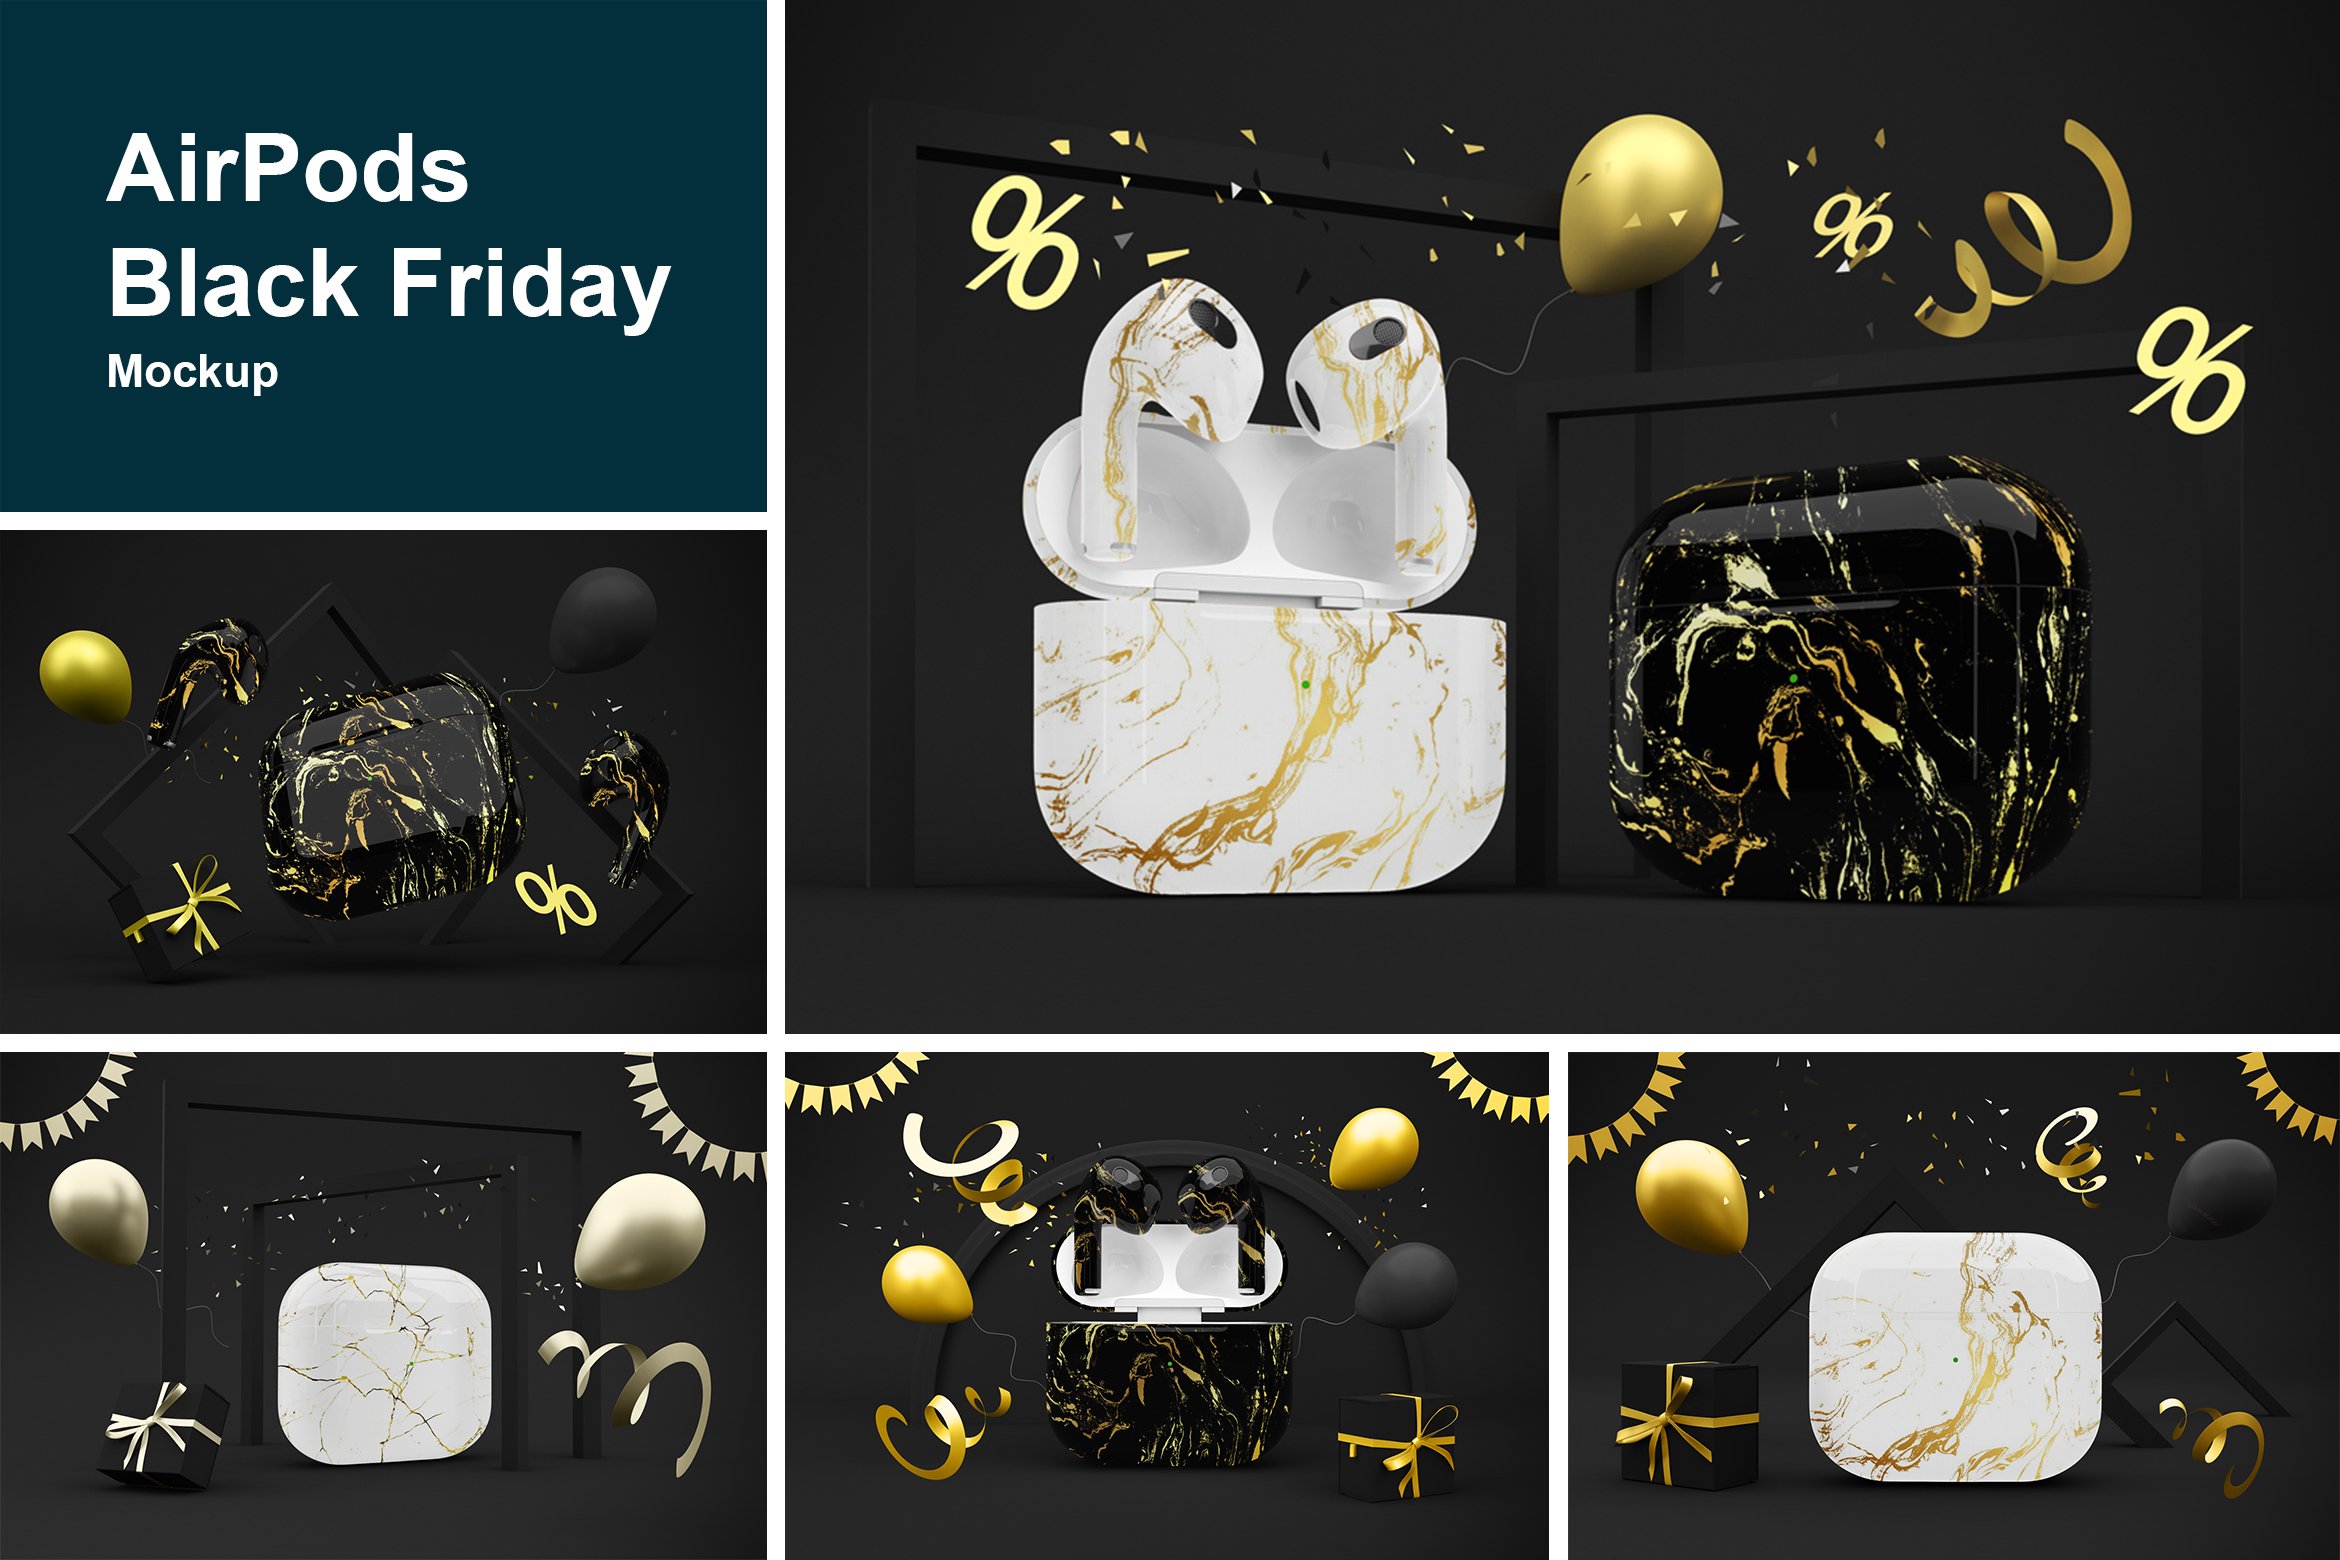 AirPods Black Friday Mockup cover image.